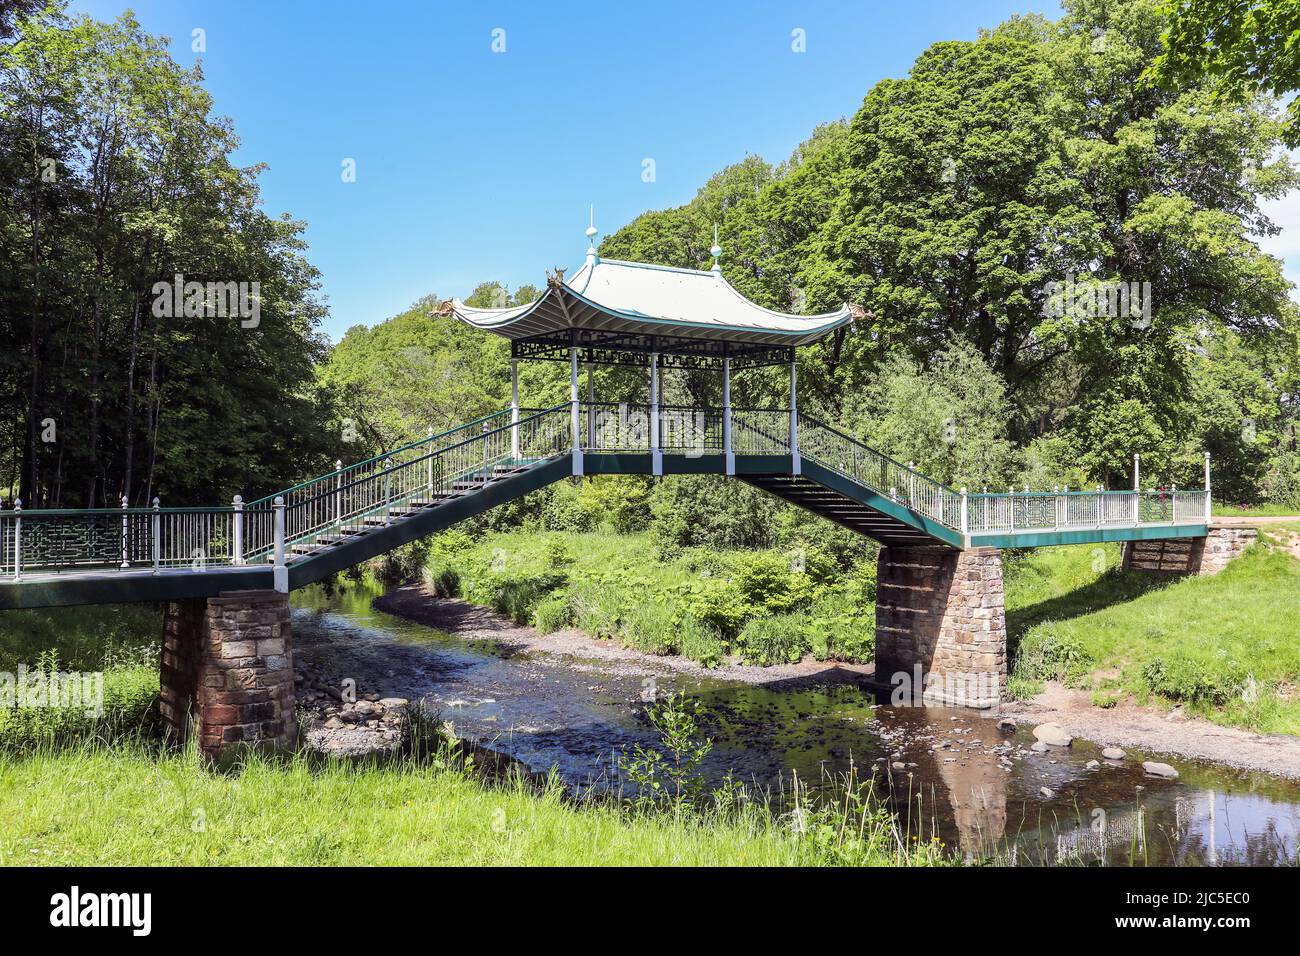 The Chinese Bridge, designed by Weir Schultz in 1899 to be constructed over the Lugar river on the Dumfries Estate, near Cumnock. Scotland, UK Stock Photo